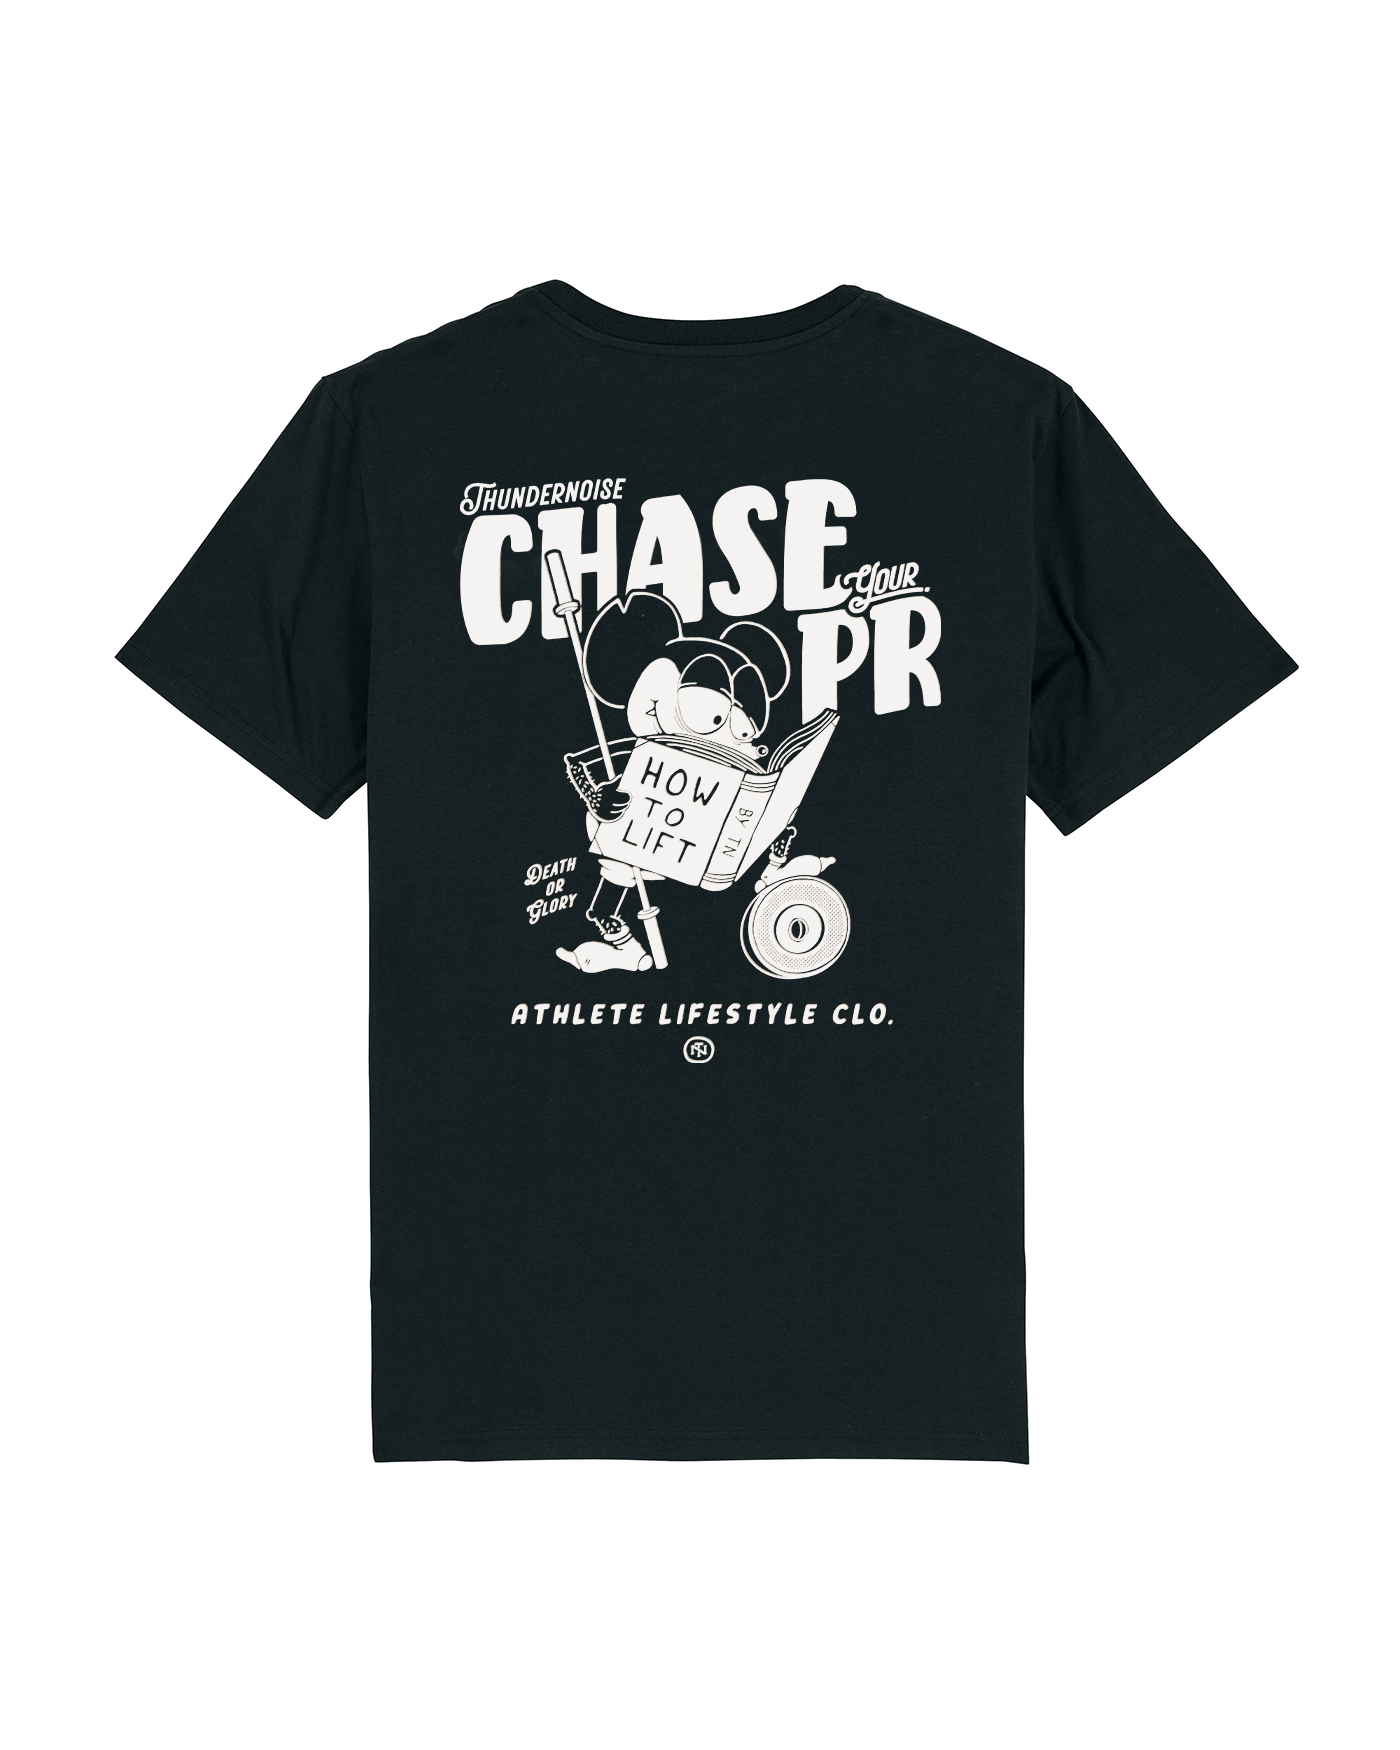 Chase your PR T-shirt - Black